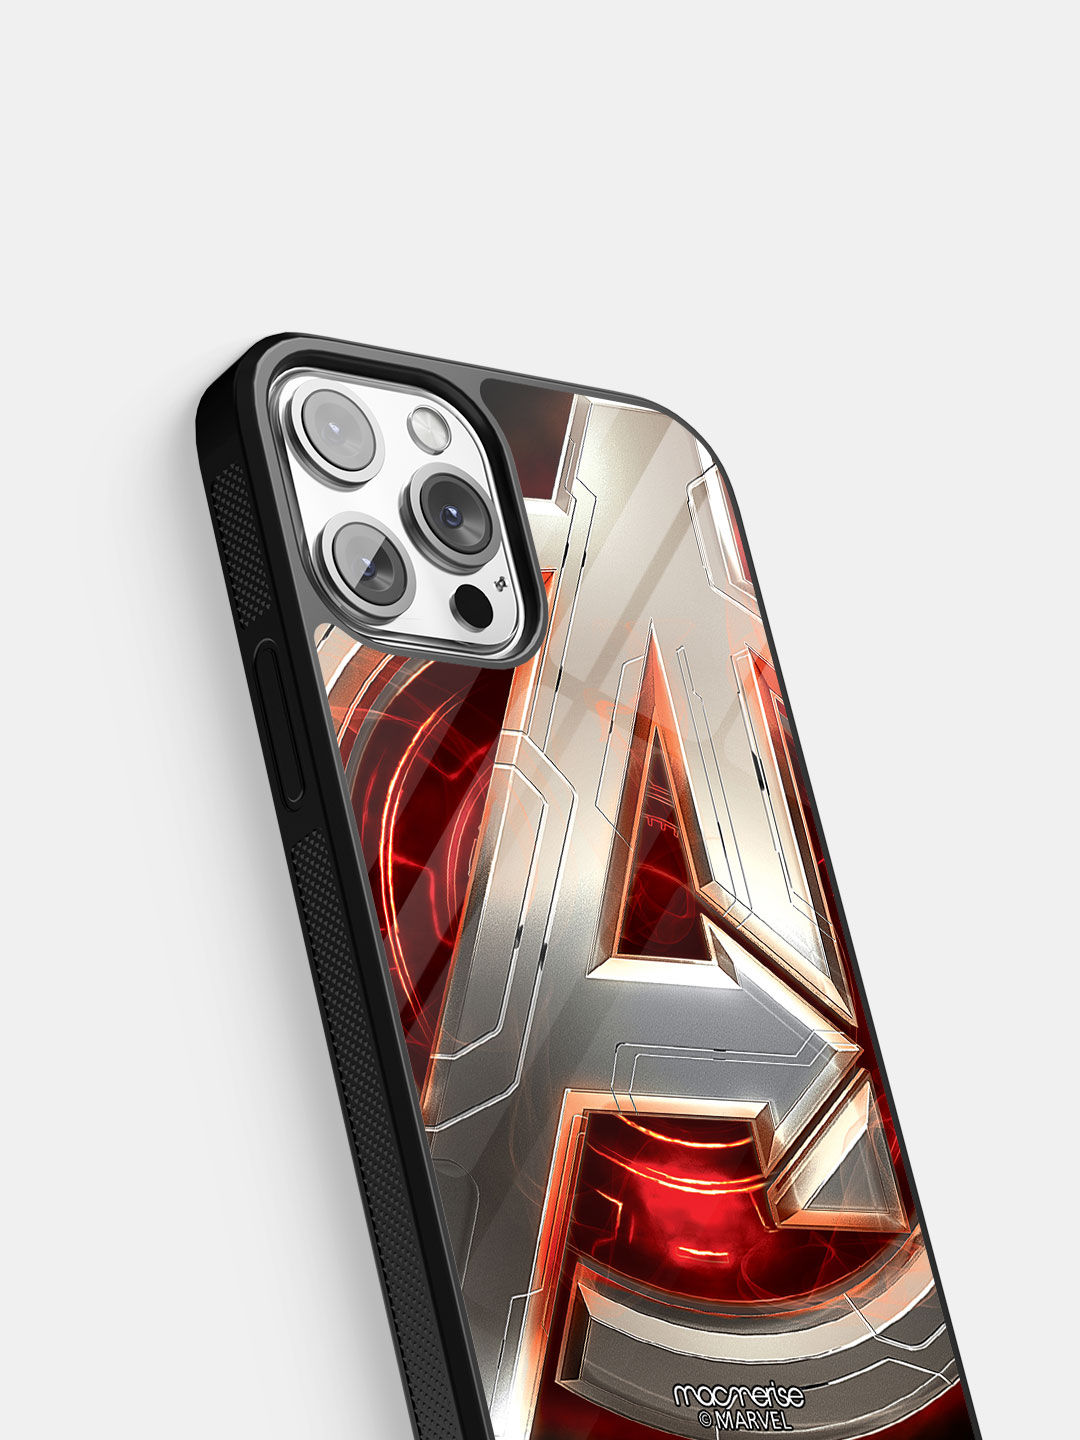 Avengers Version 2 - Glass Case For iPhone 13 Pro Max